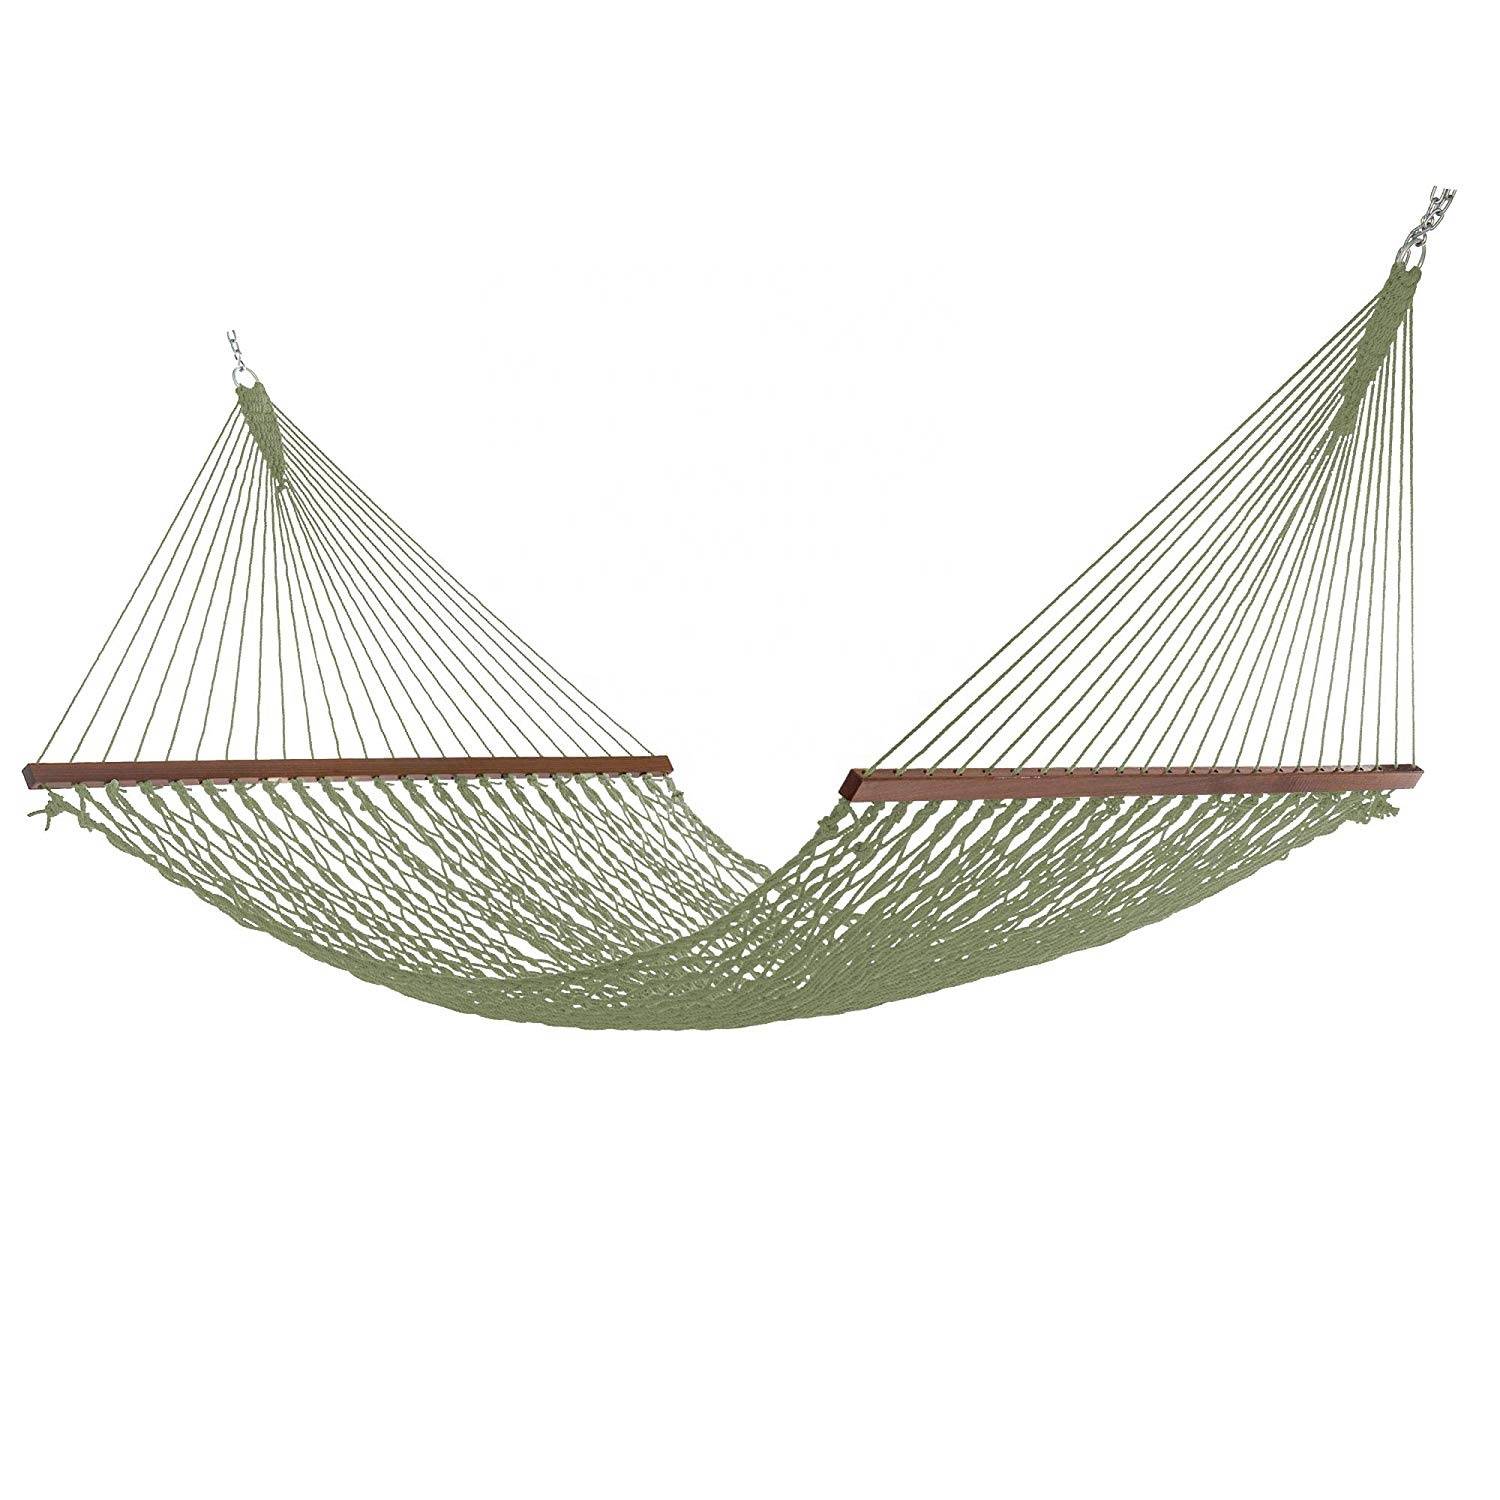 Caribbean hammock with 2 chains and S hooks Rope swing hammock